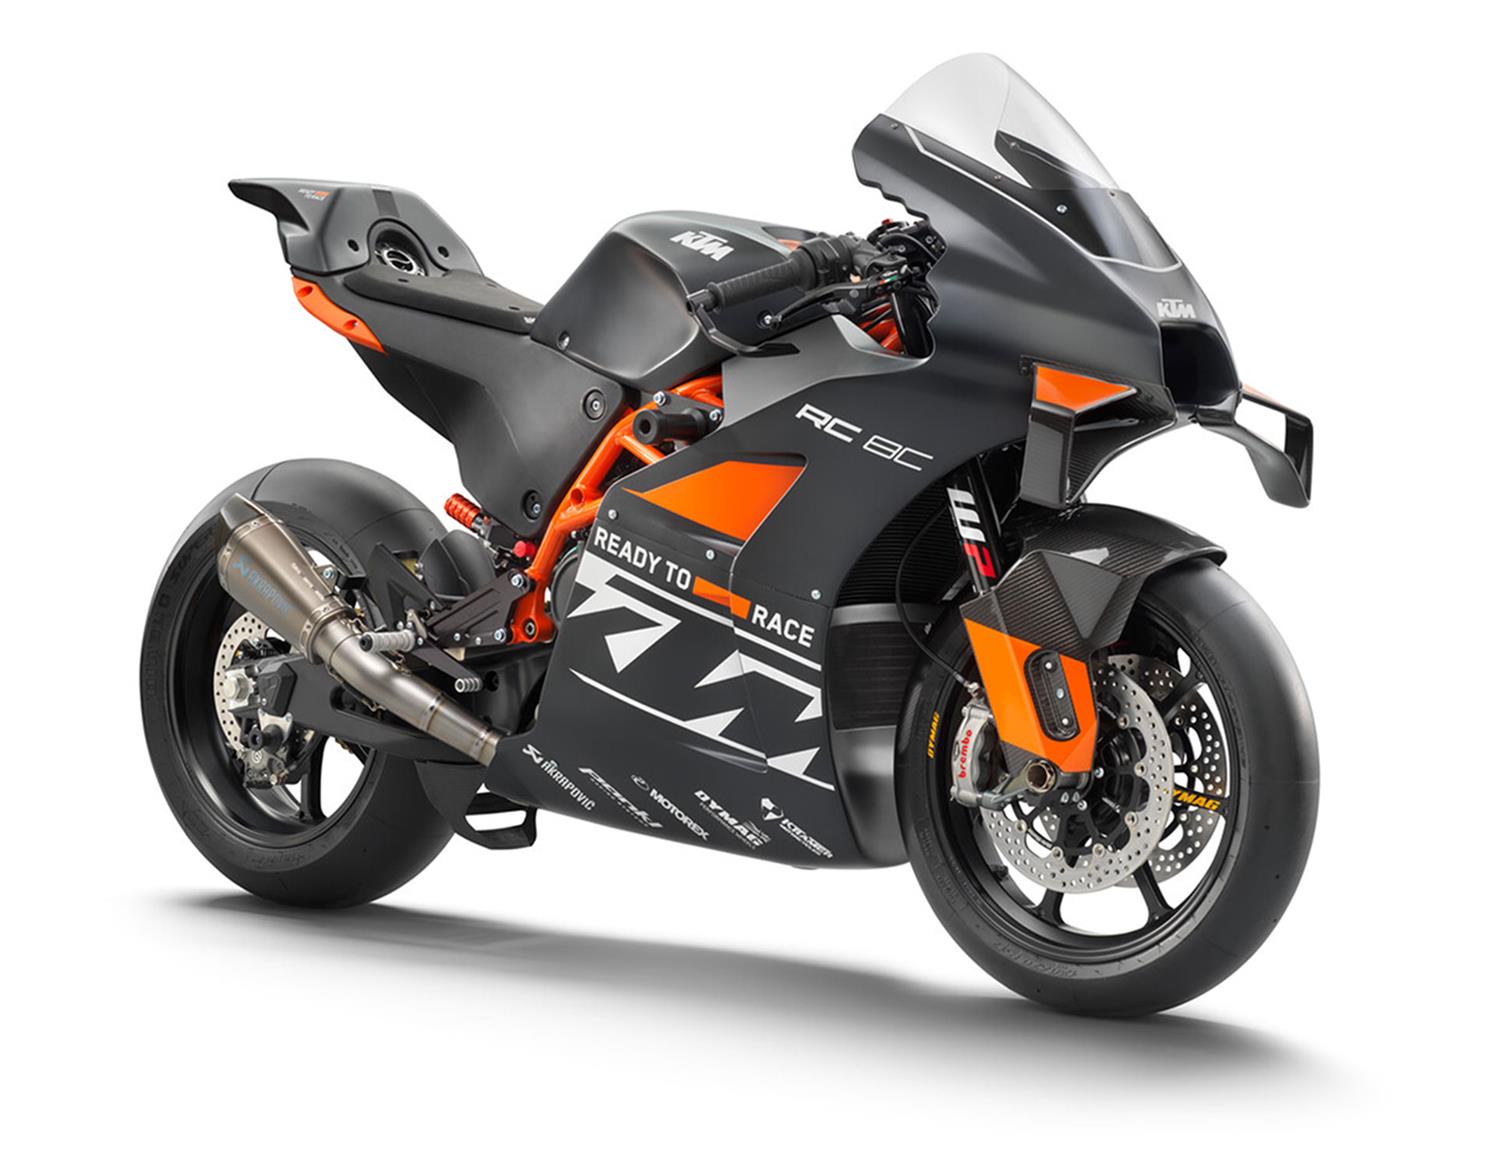 Track-only KTM RC 8C goes on a diet and gains more power for 2023